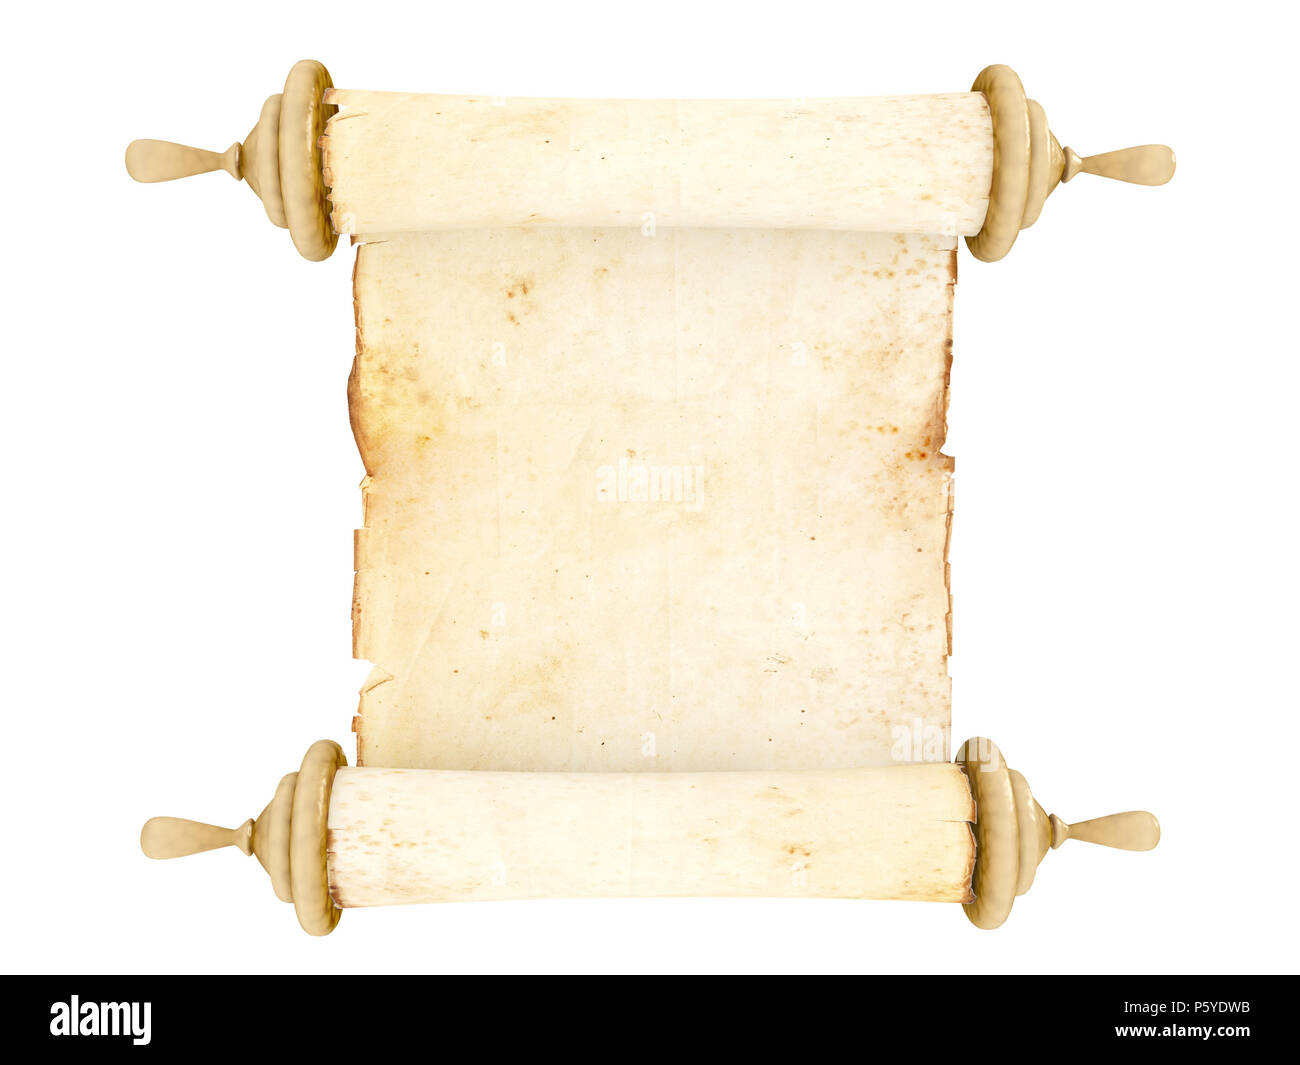 Old antique scroll paper on white background Stock Photo